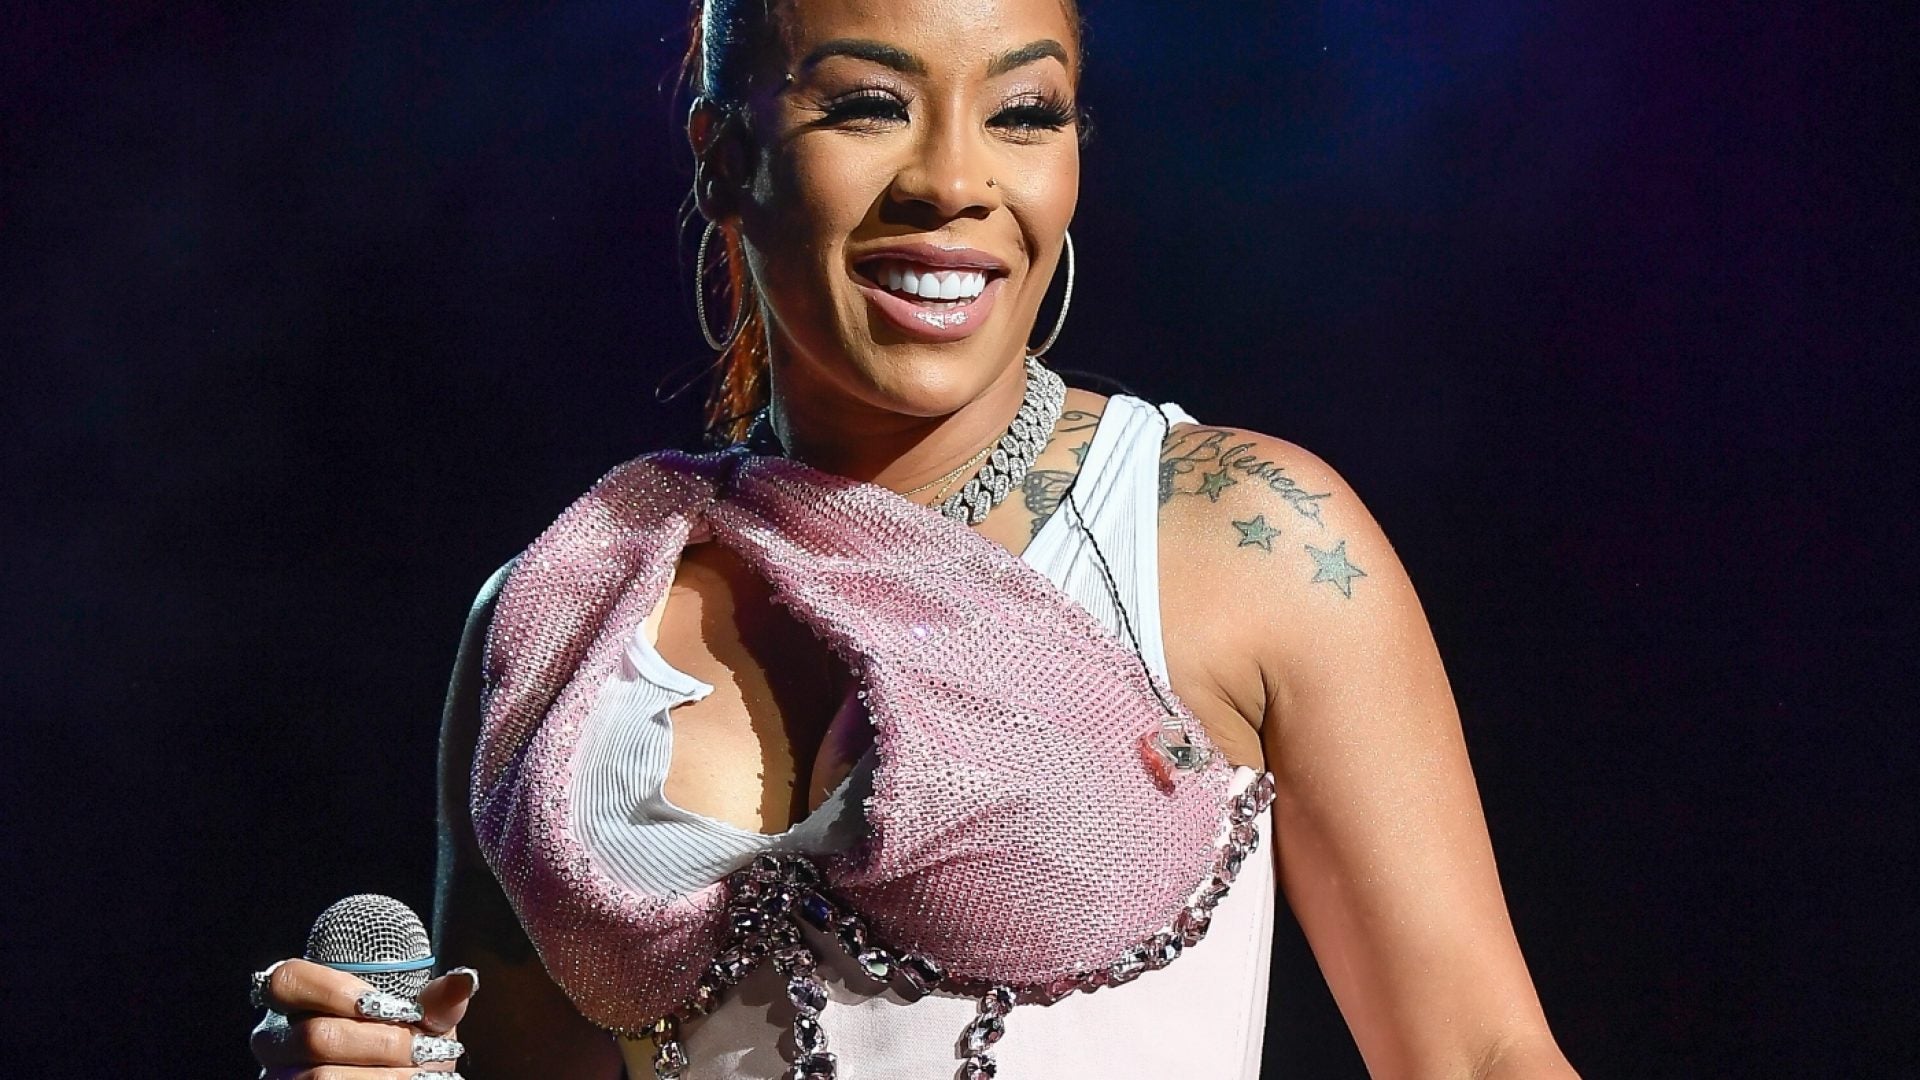 'Coping? I Don't Know About That': Keyshia Cole On Grieving, UNCENSORED Feature, Parenting, And Music